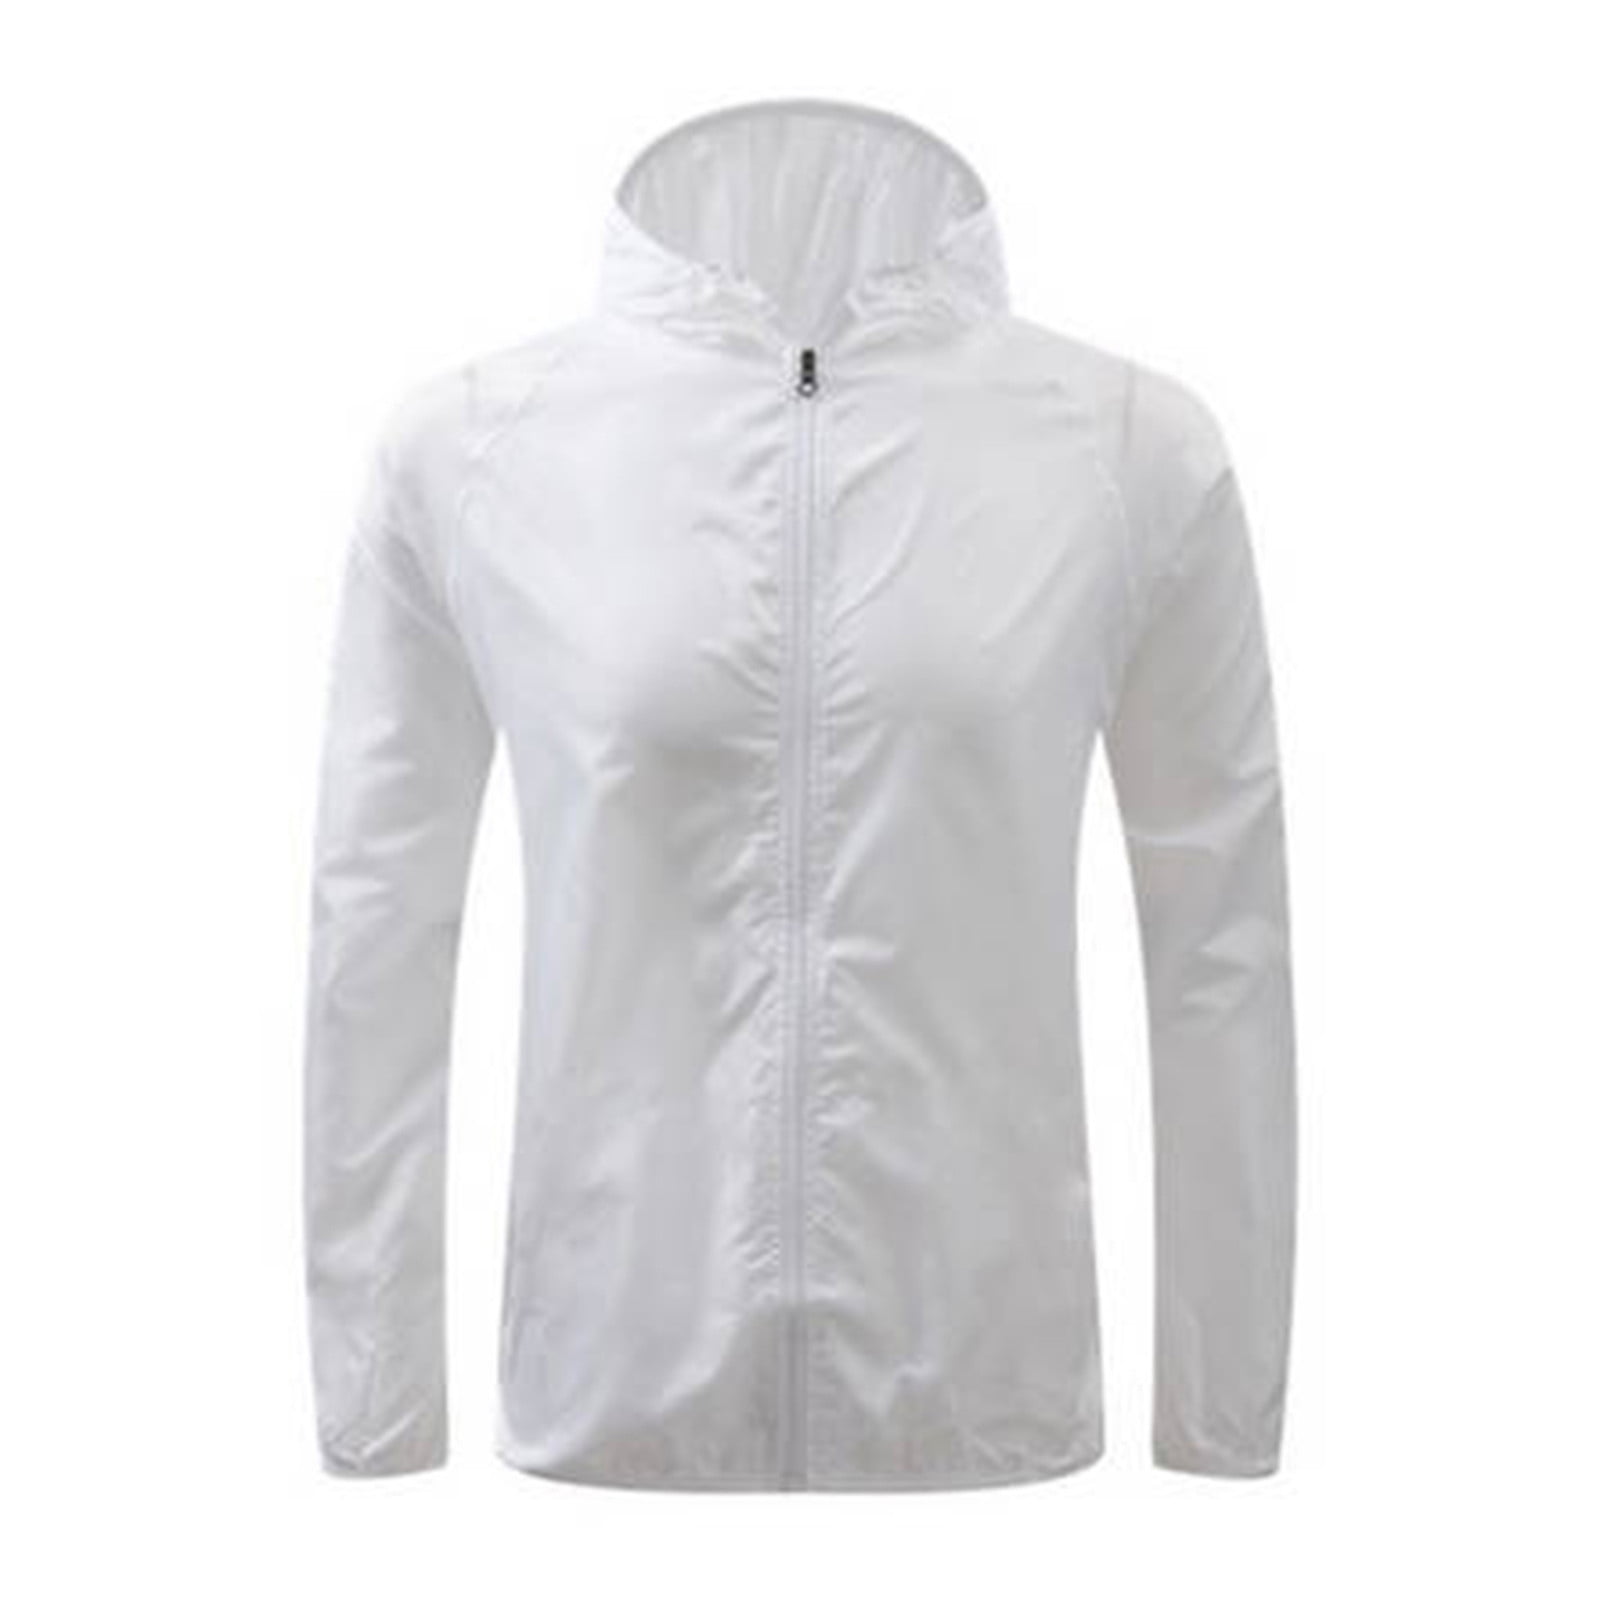 BXJX Windbreaker Jackets for Women Solid Color Pockets without Hood ...